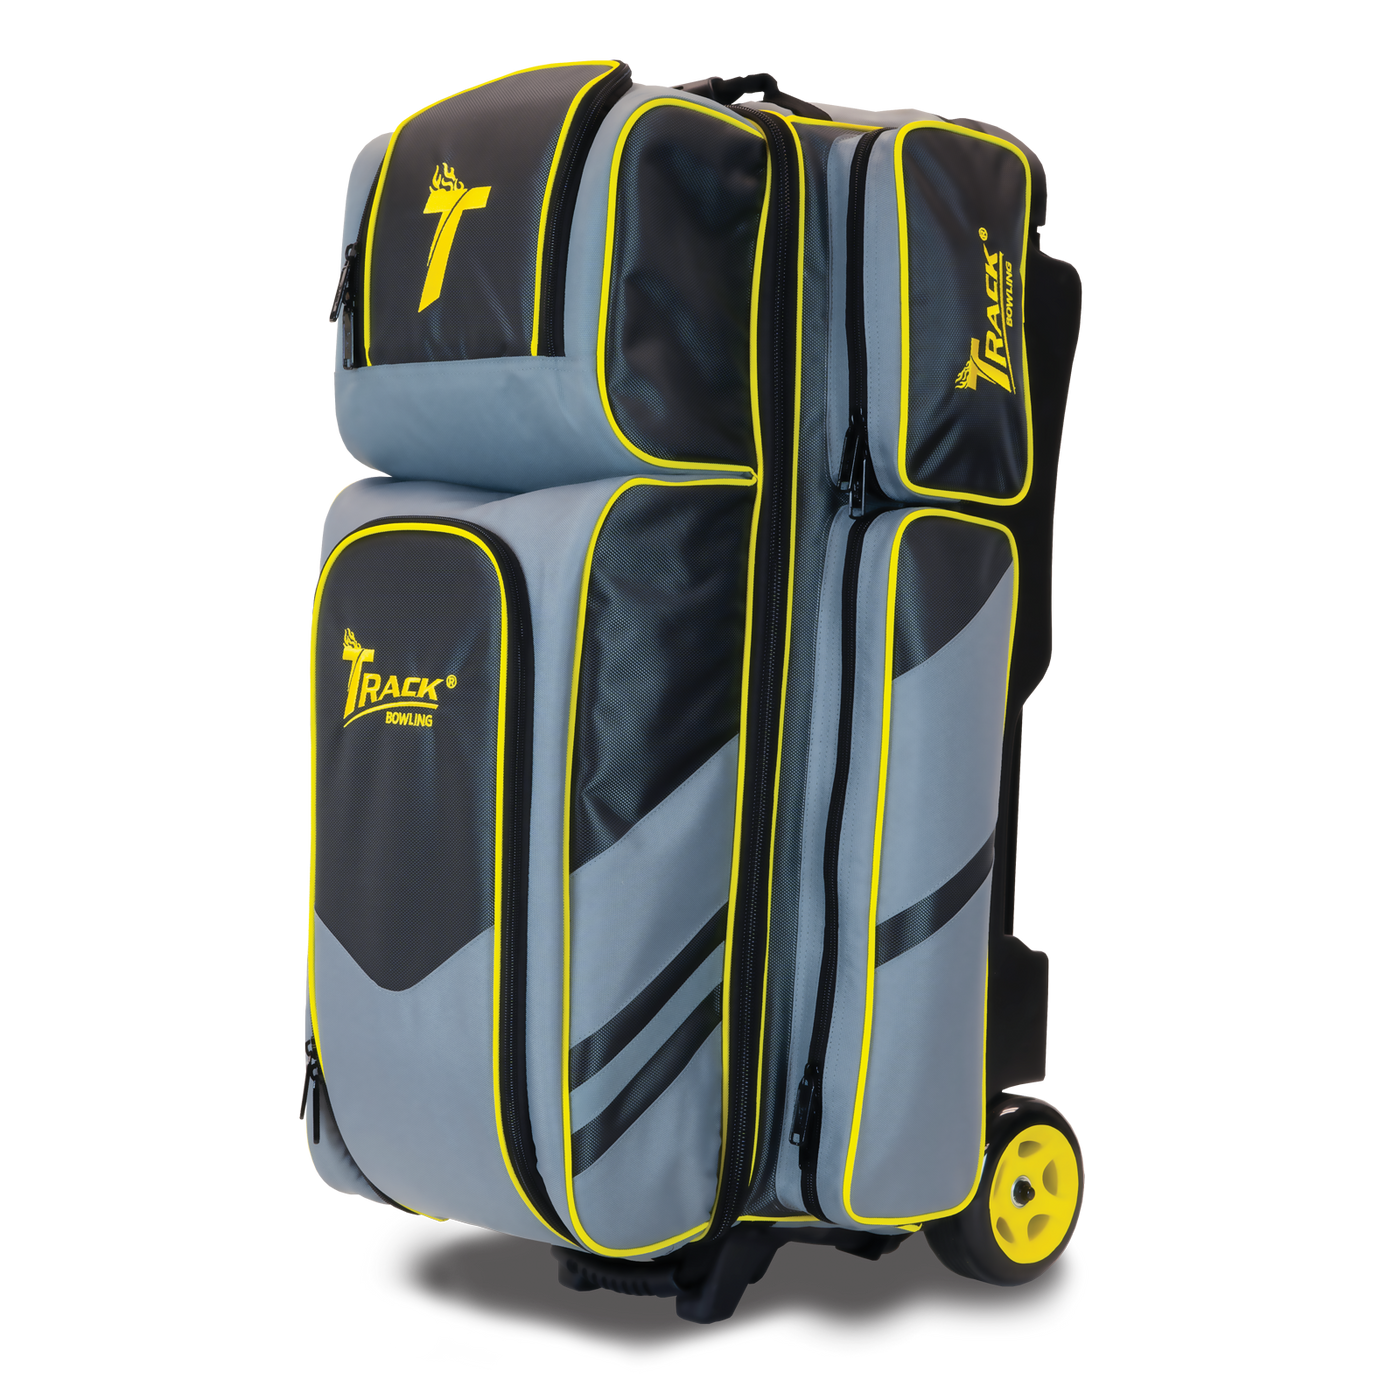 Select Triple Roller three-quarter view in Grey, Black, and Yellow colors.